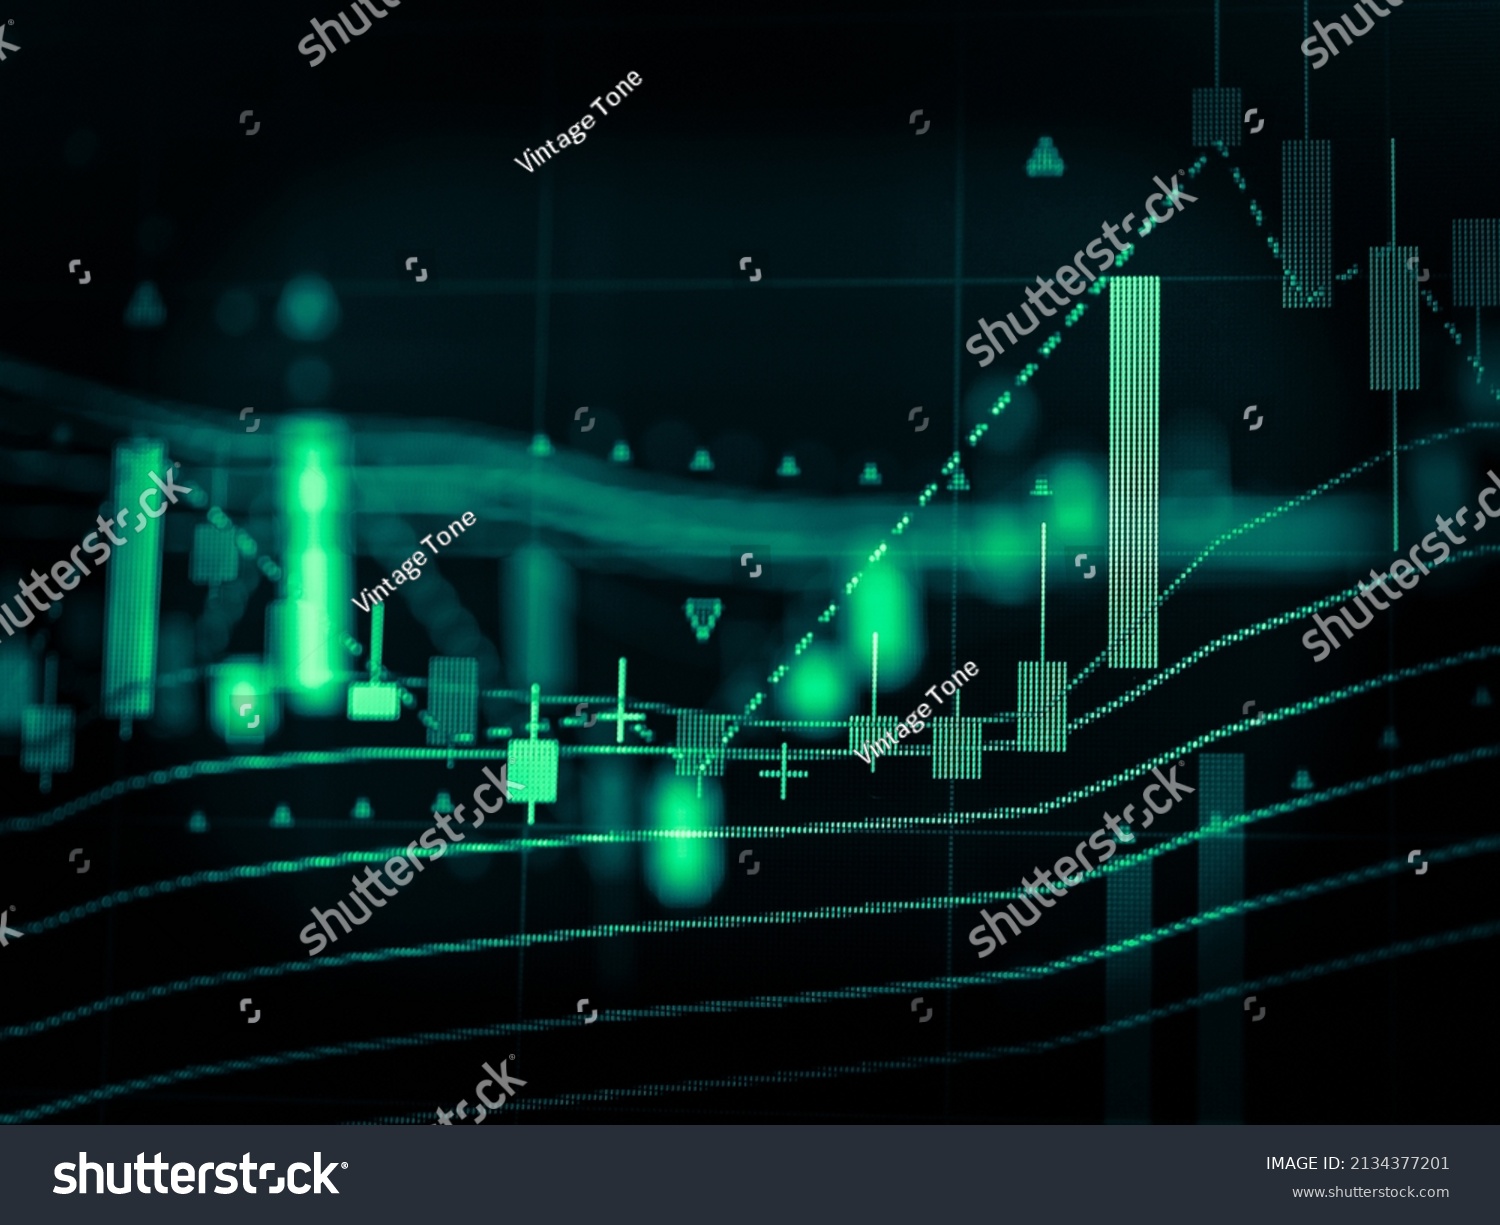 Candlestick graph chart of stock and forex market to represent the revenue growth. the stock market crashed from covid19 and war, and waiting for reverse trend to investing in growth stocks. #2134377201